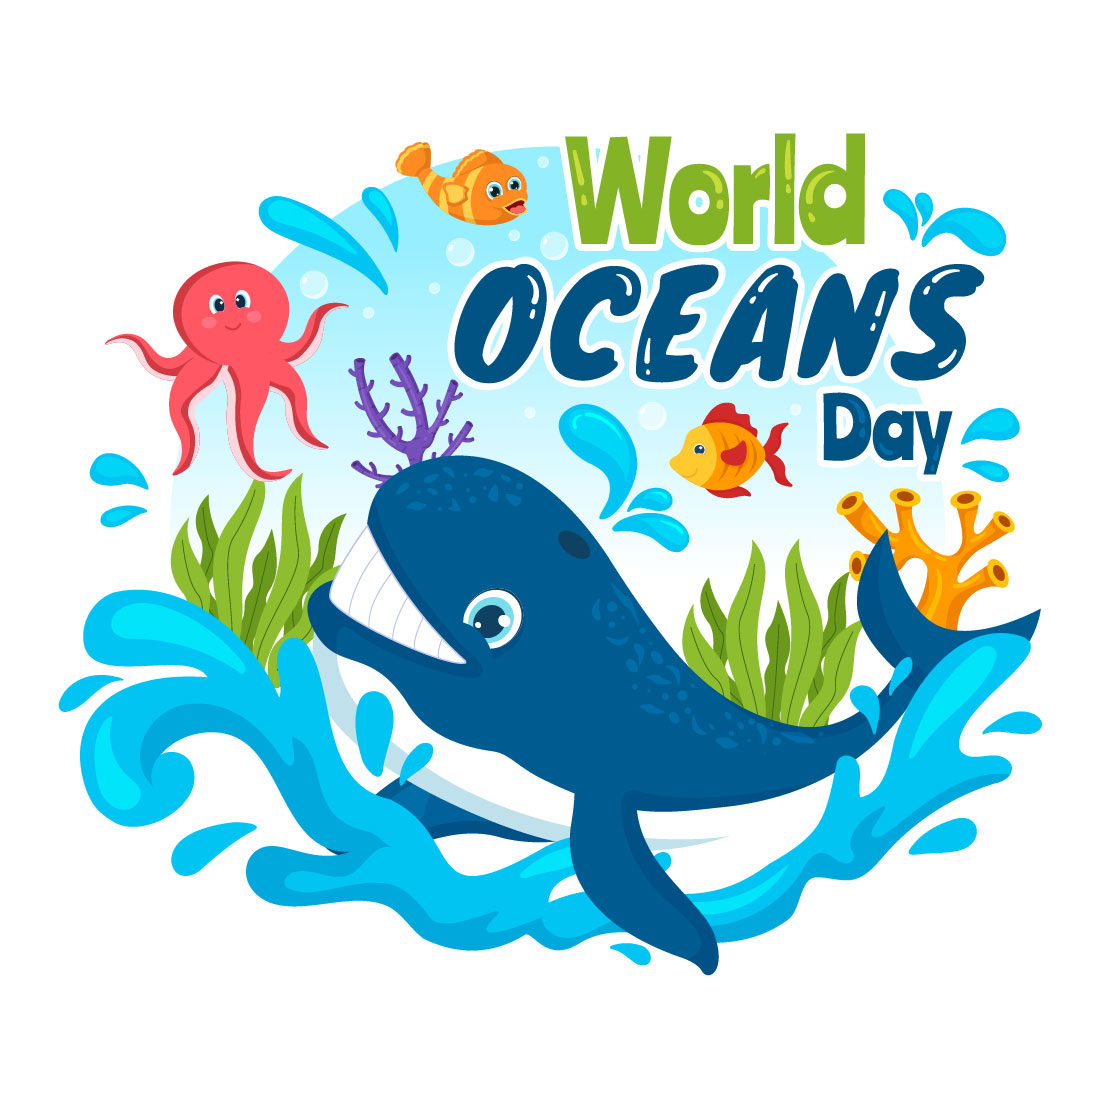 15 World Oceans Day Illustration preview image.